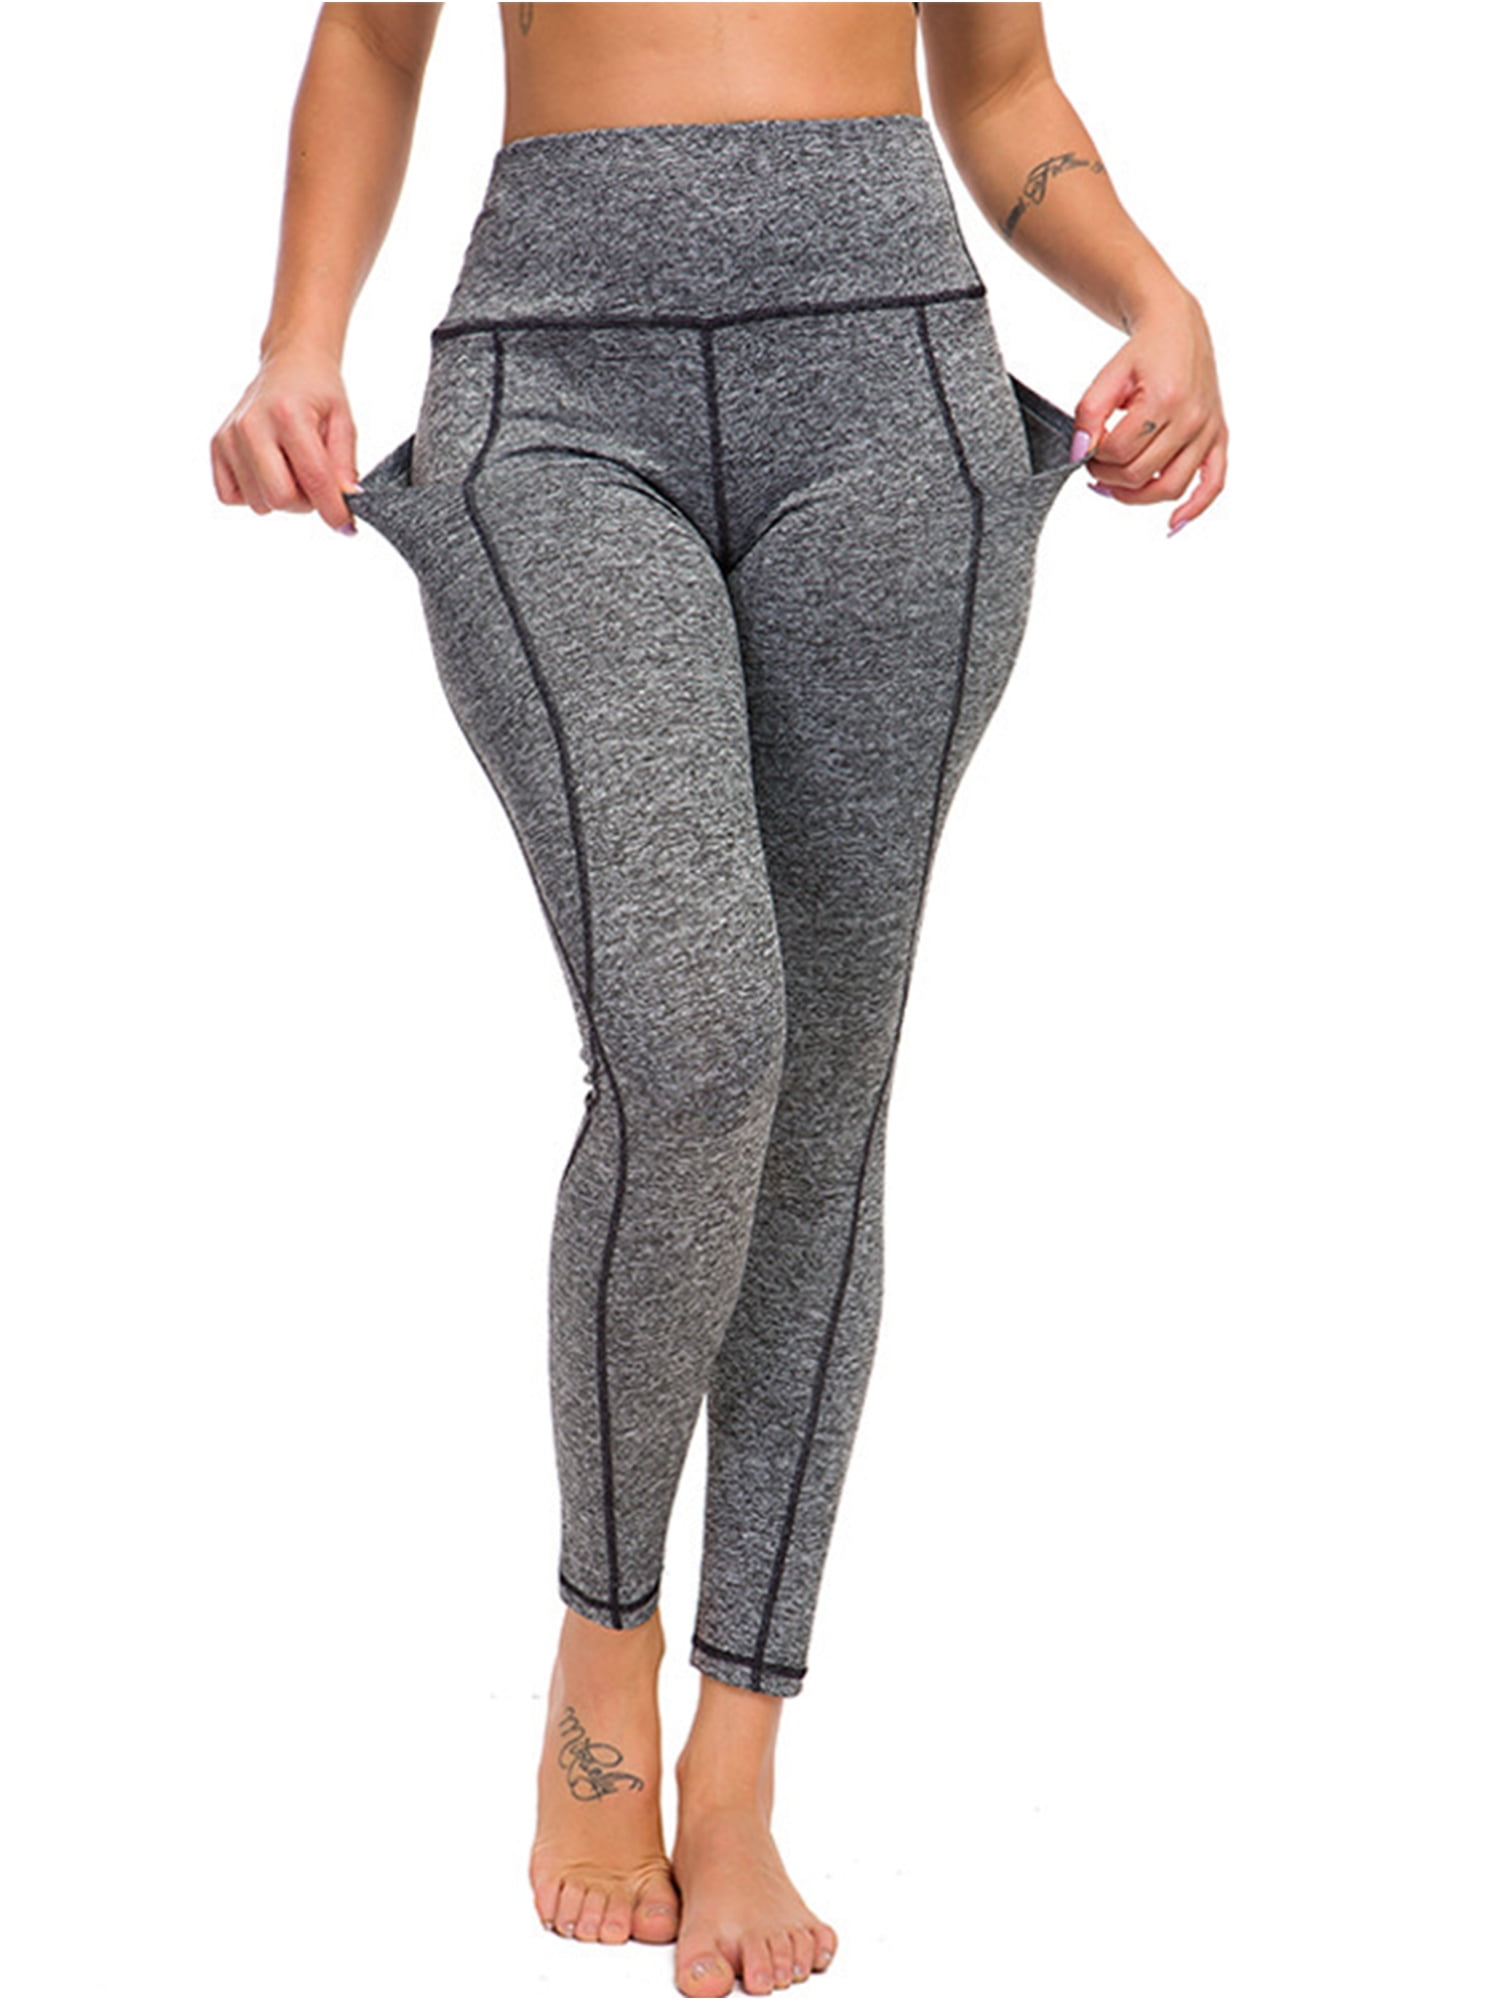 Lady Yoga Gym Sports Workout Leggings Running Fitness Stretch Pants With Pocket 